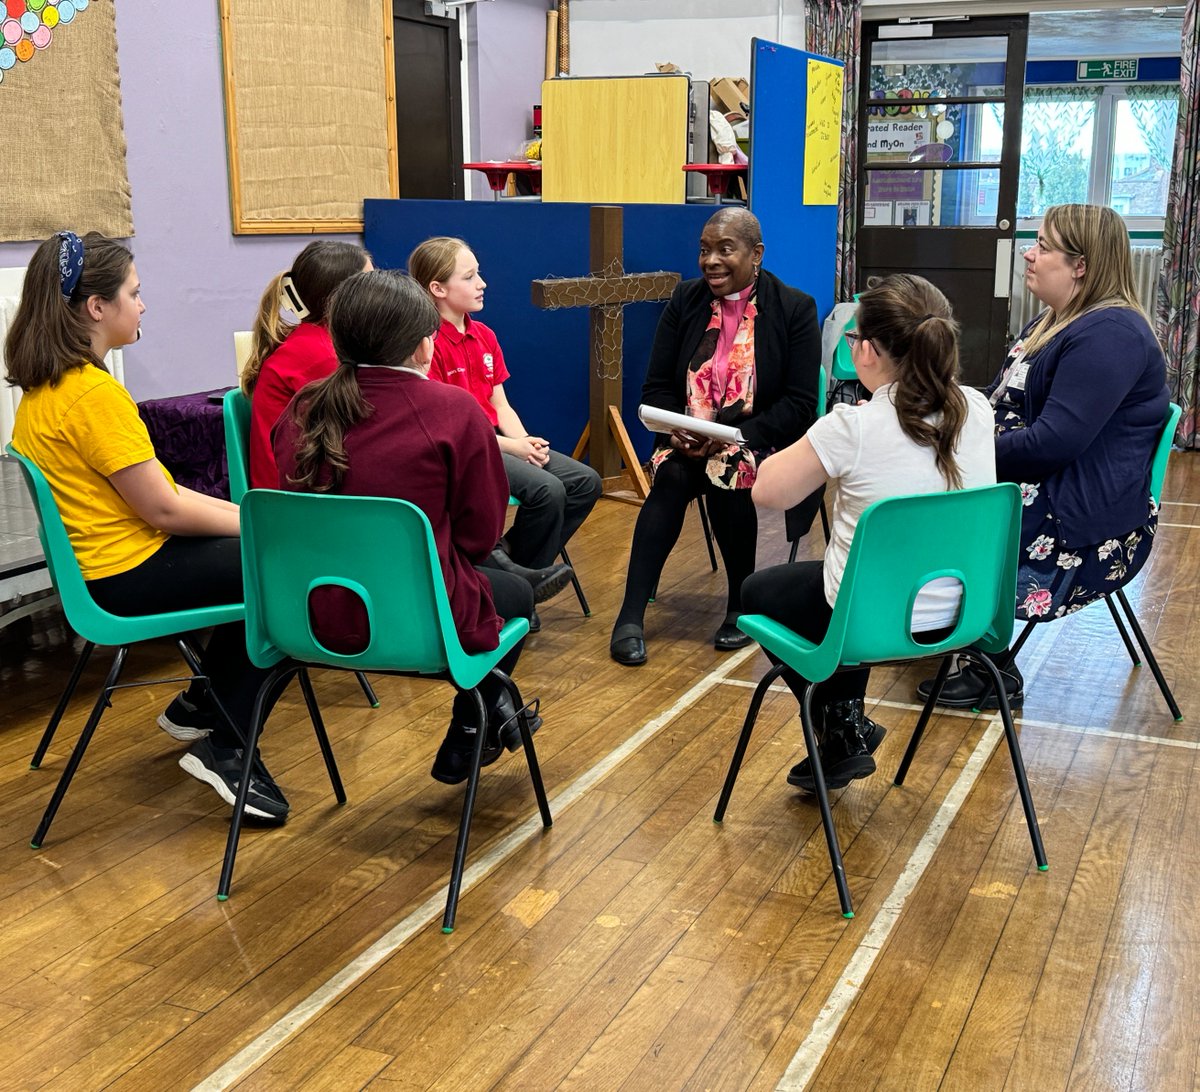 Inspiring to be out in @CanterburyDio last week visiting two of our schools -@HTSJCEP and @hernecej - and Tenterden Glebe WI. Thank you to all involved - I really enjoyed meeting you.